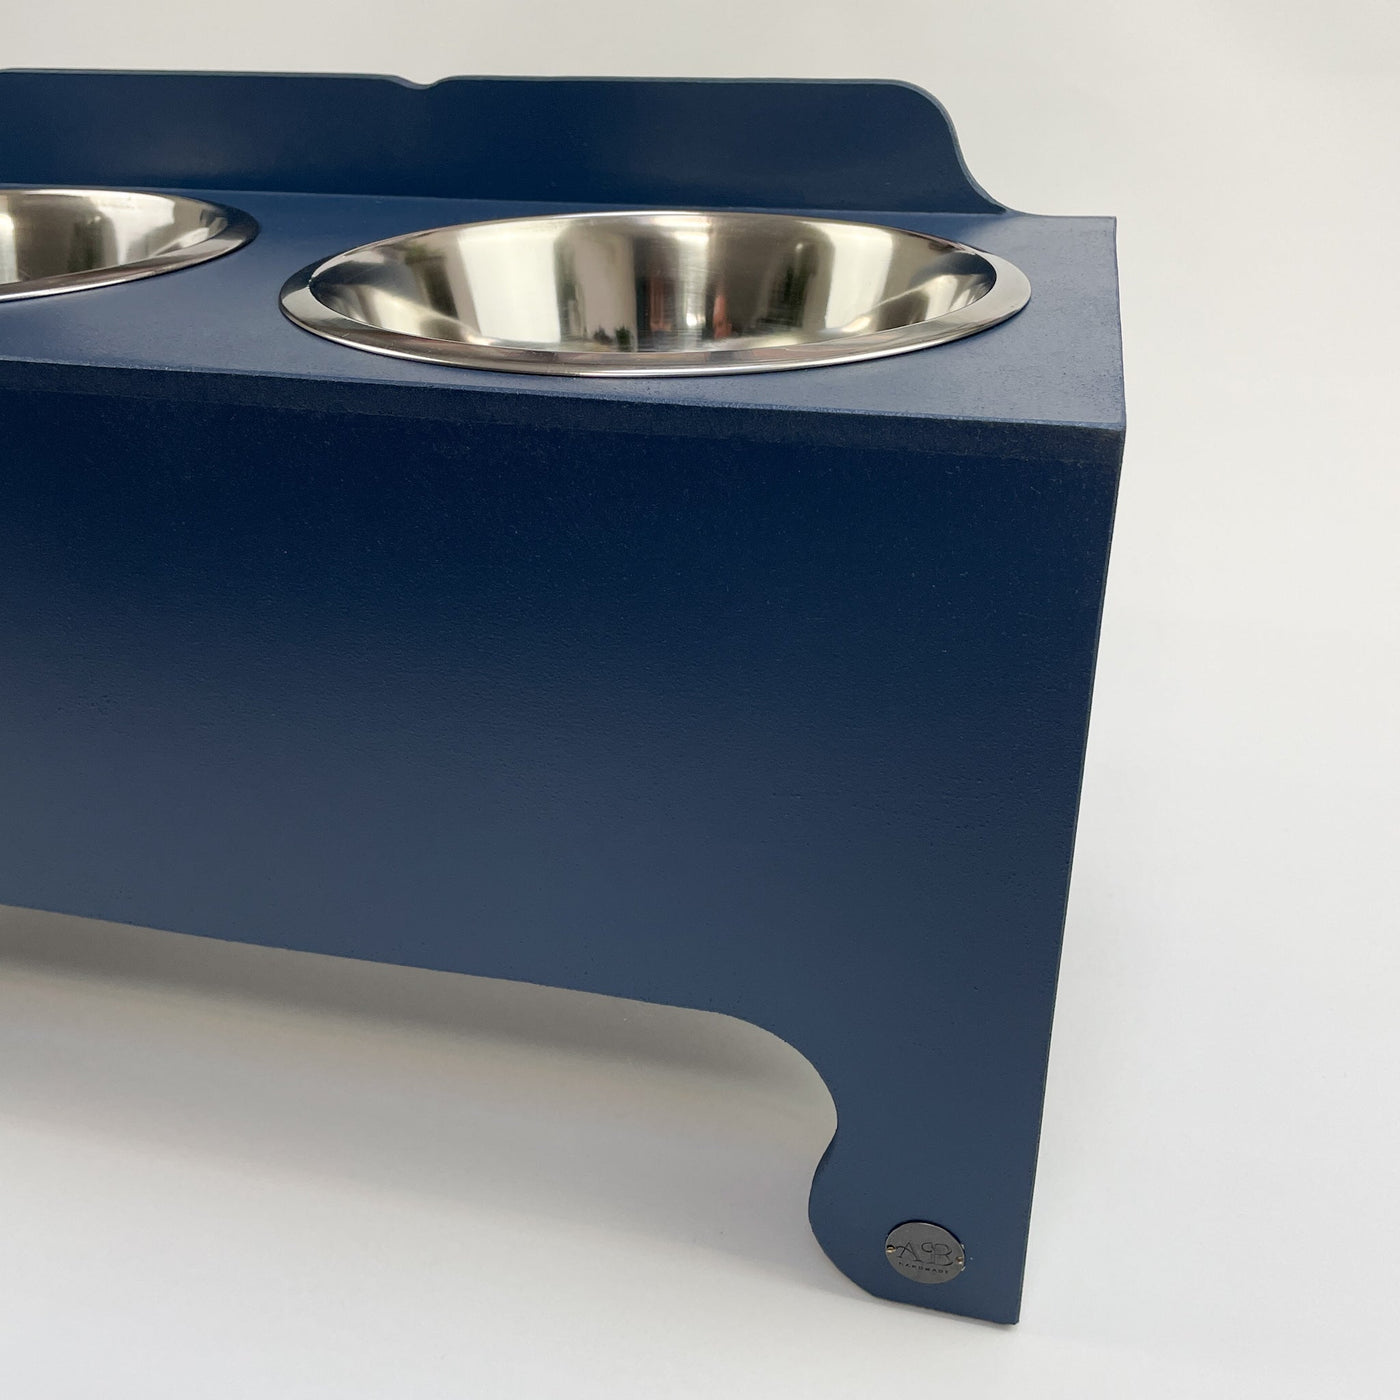 Navy, raised dog feeder with stainless steel food dishes